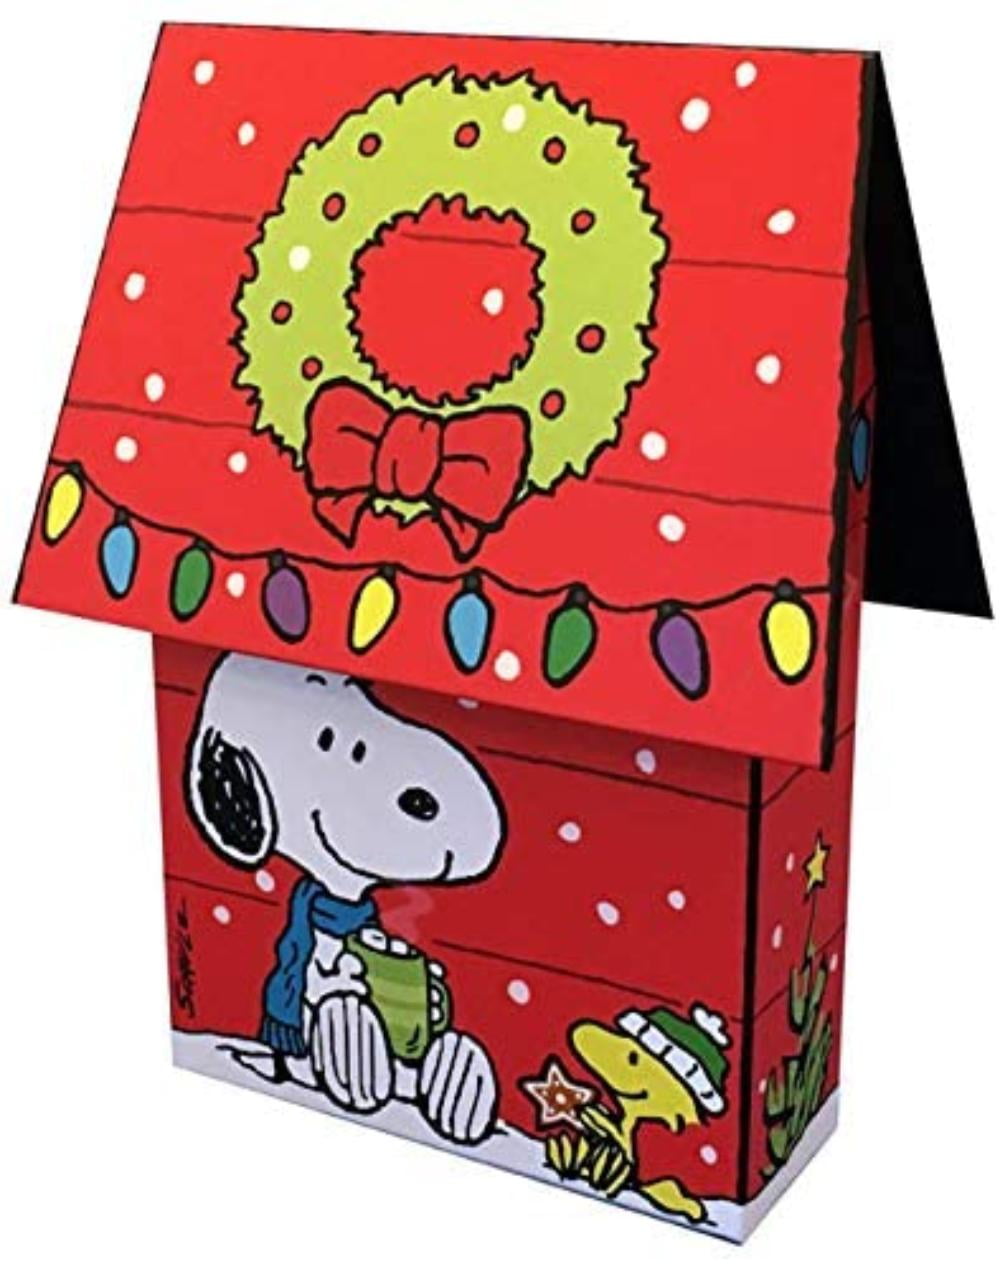 Charles Schulz Christmas Card Woodstock Snoopy Doghouse Vintage Collectible New 